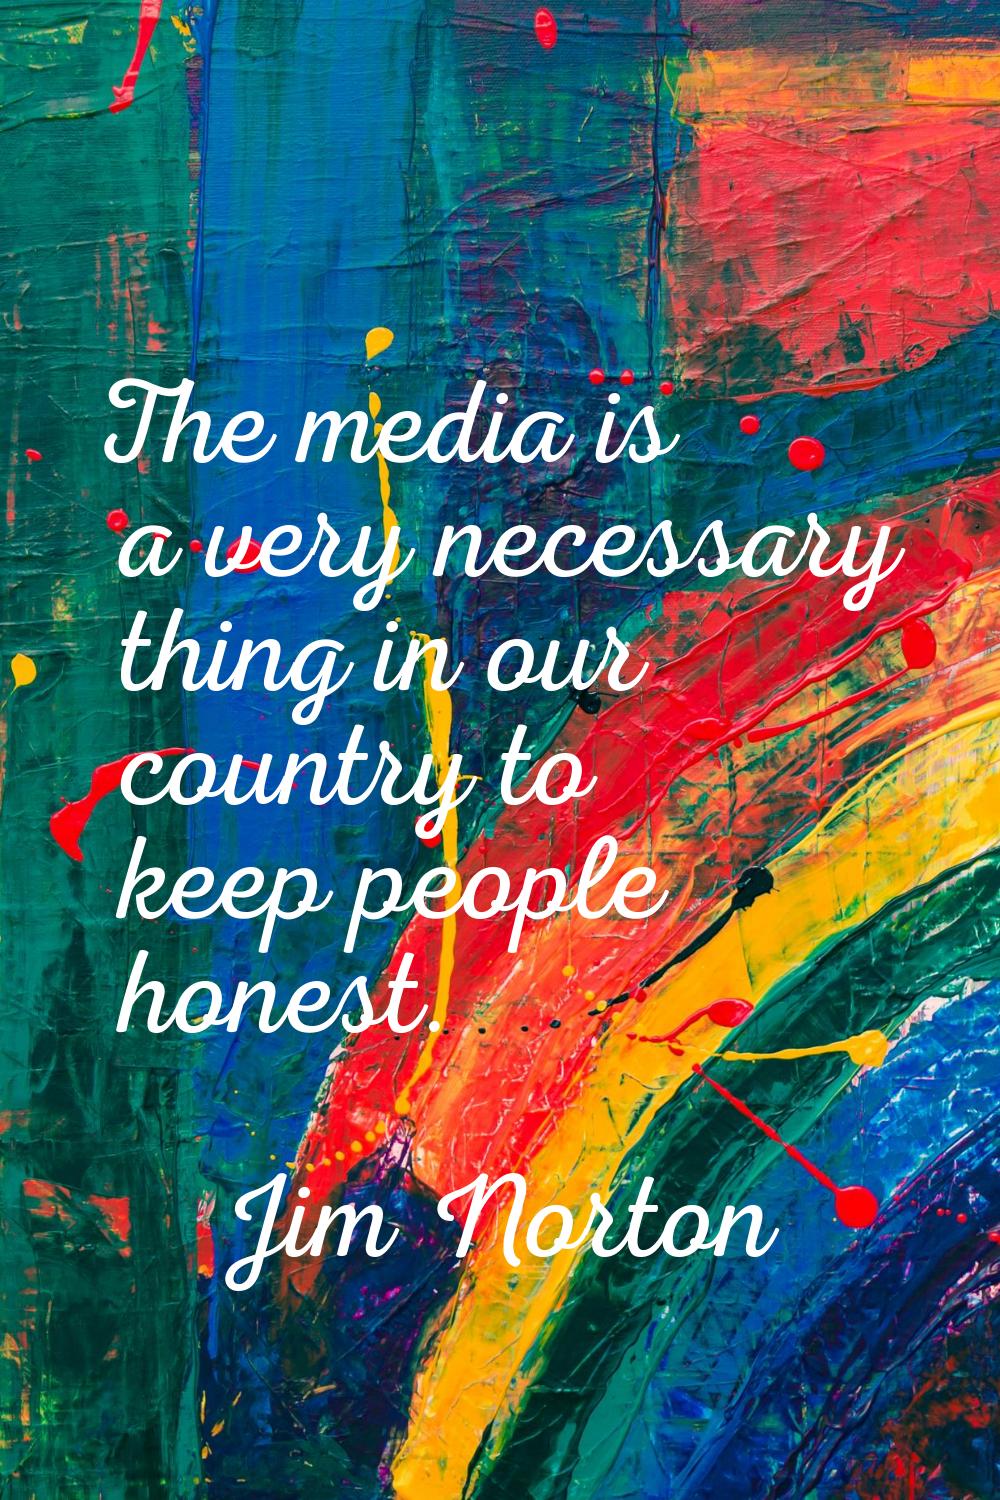 The media is a very necessary thing in our country to keep people honest.